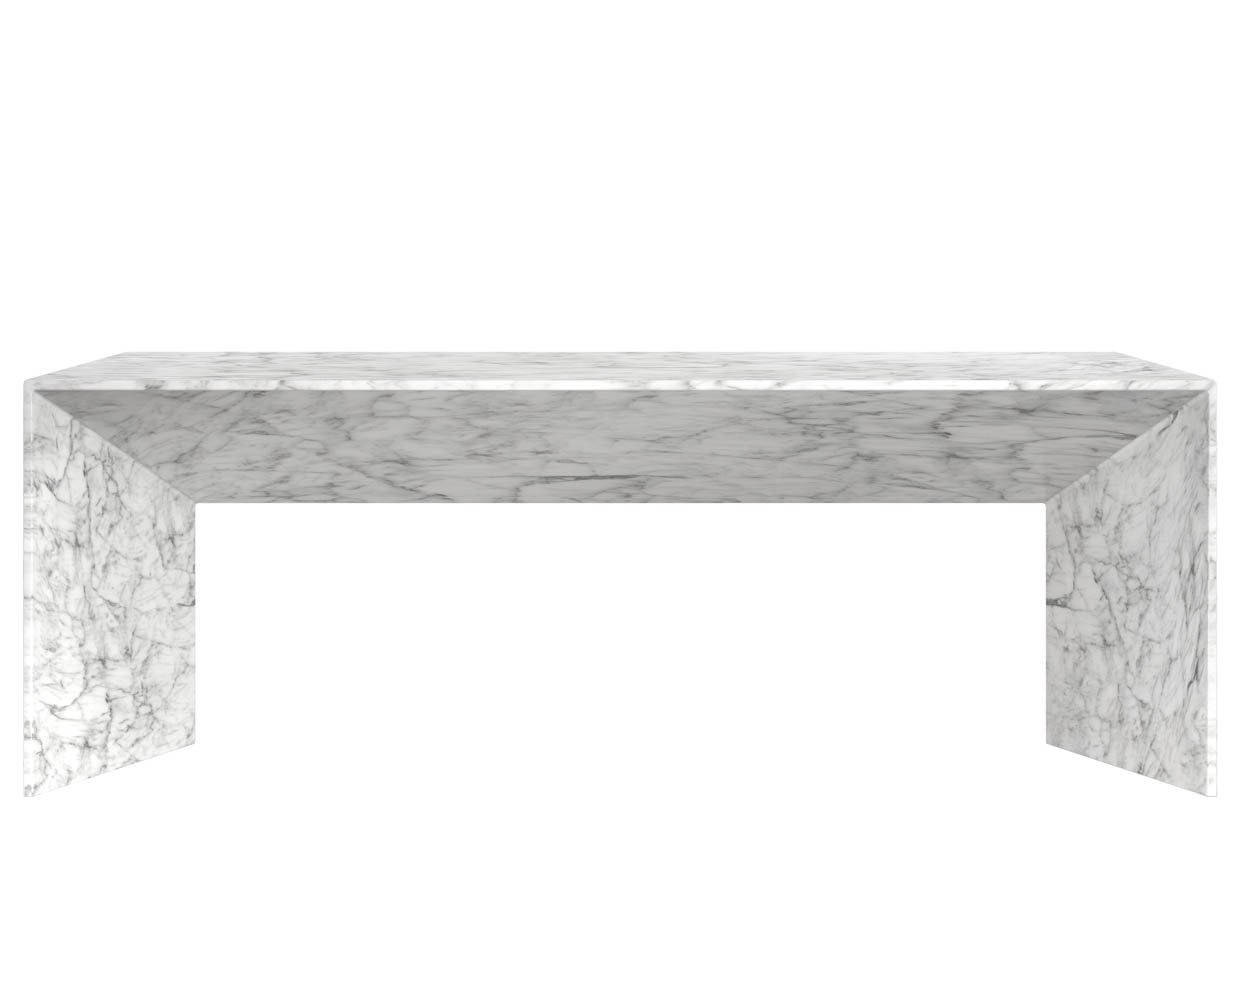 Nomad Coffee Table - Marble Look